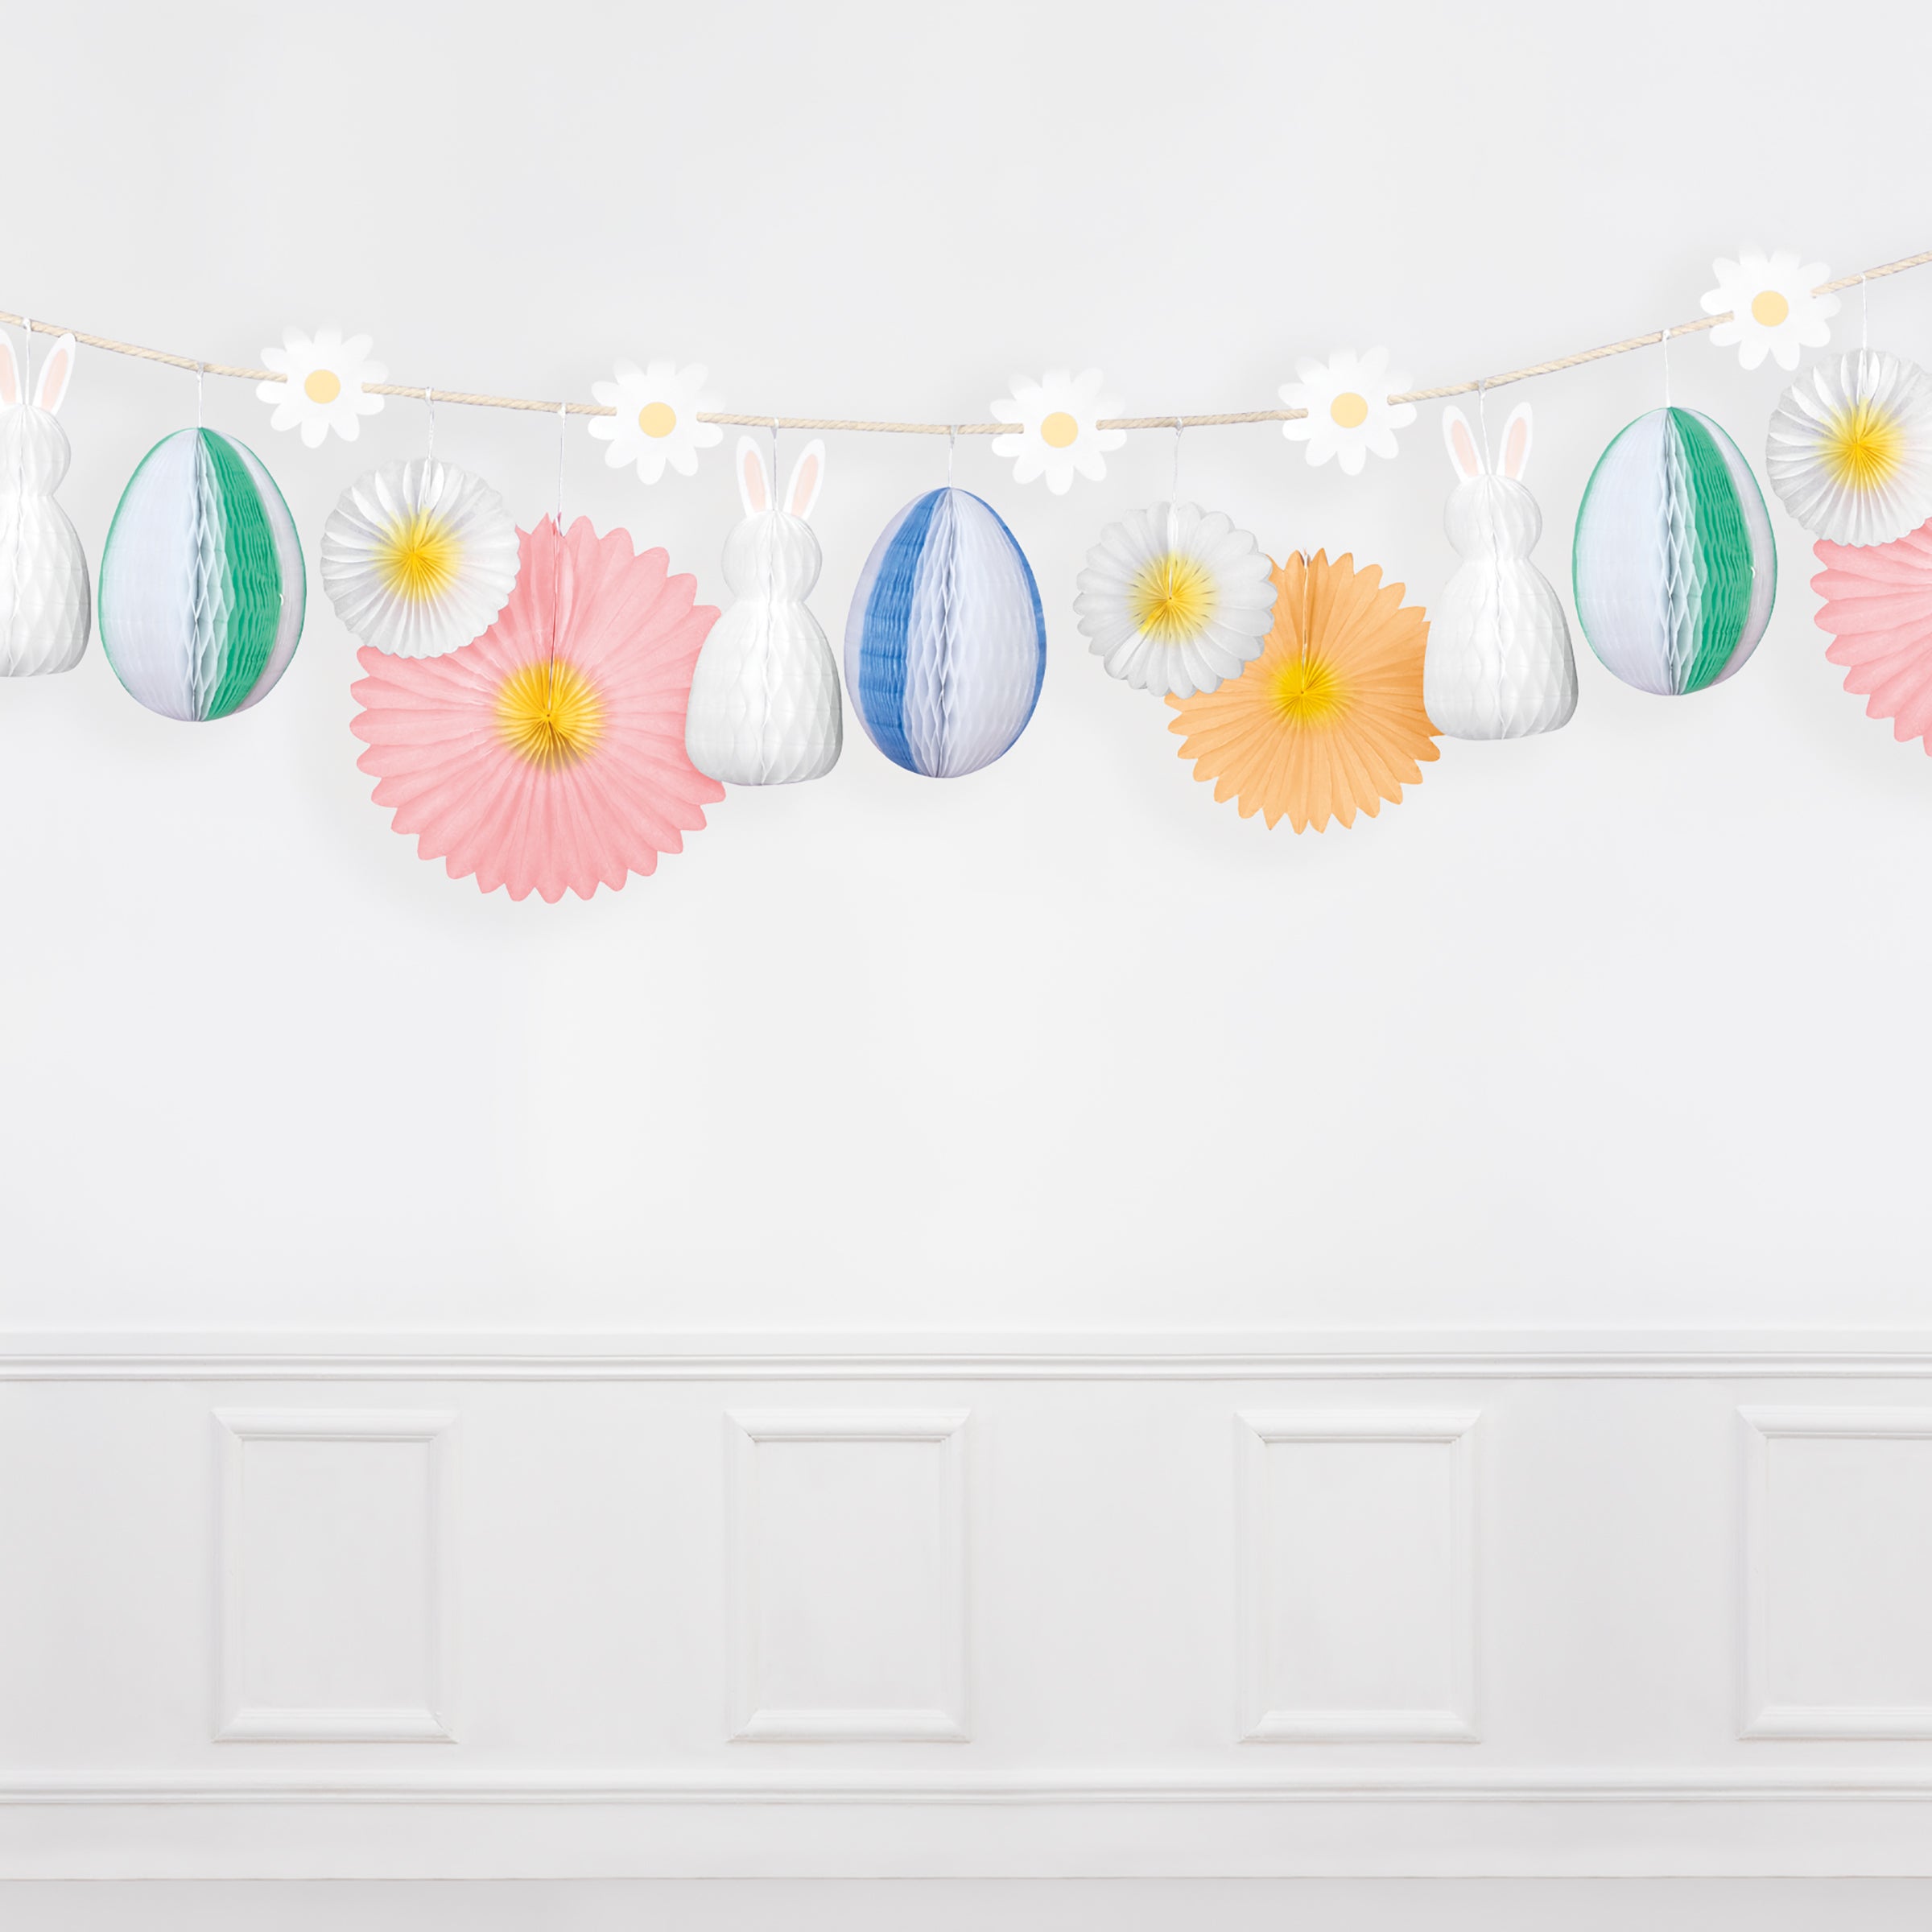 Our Easter garland features honeycomb decorations of bunnies, flowers and eggs.